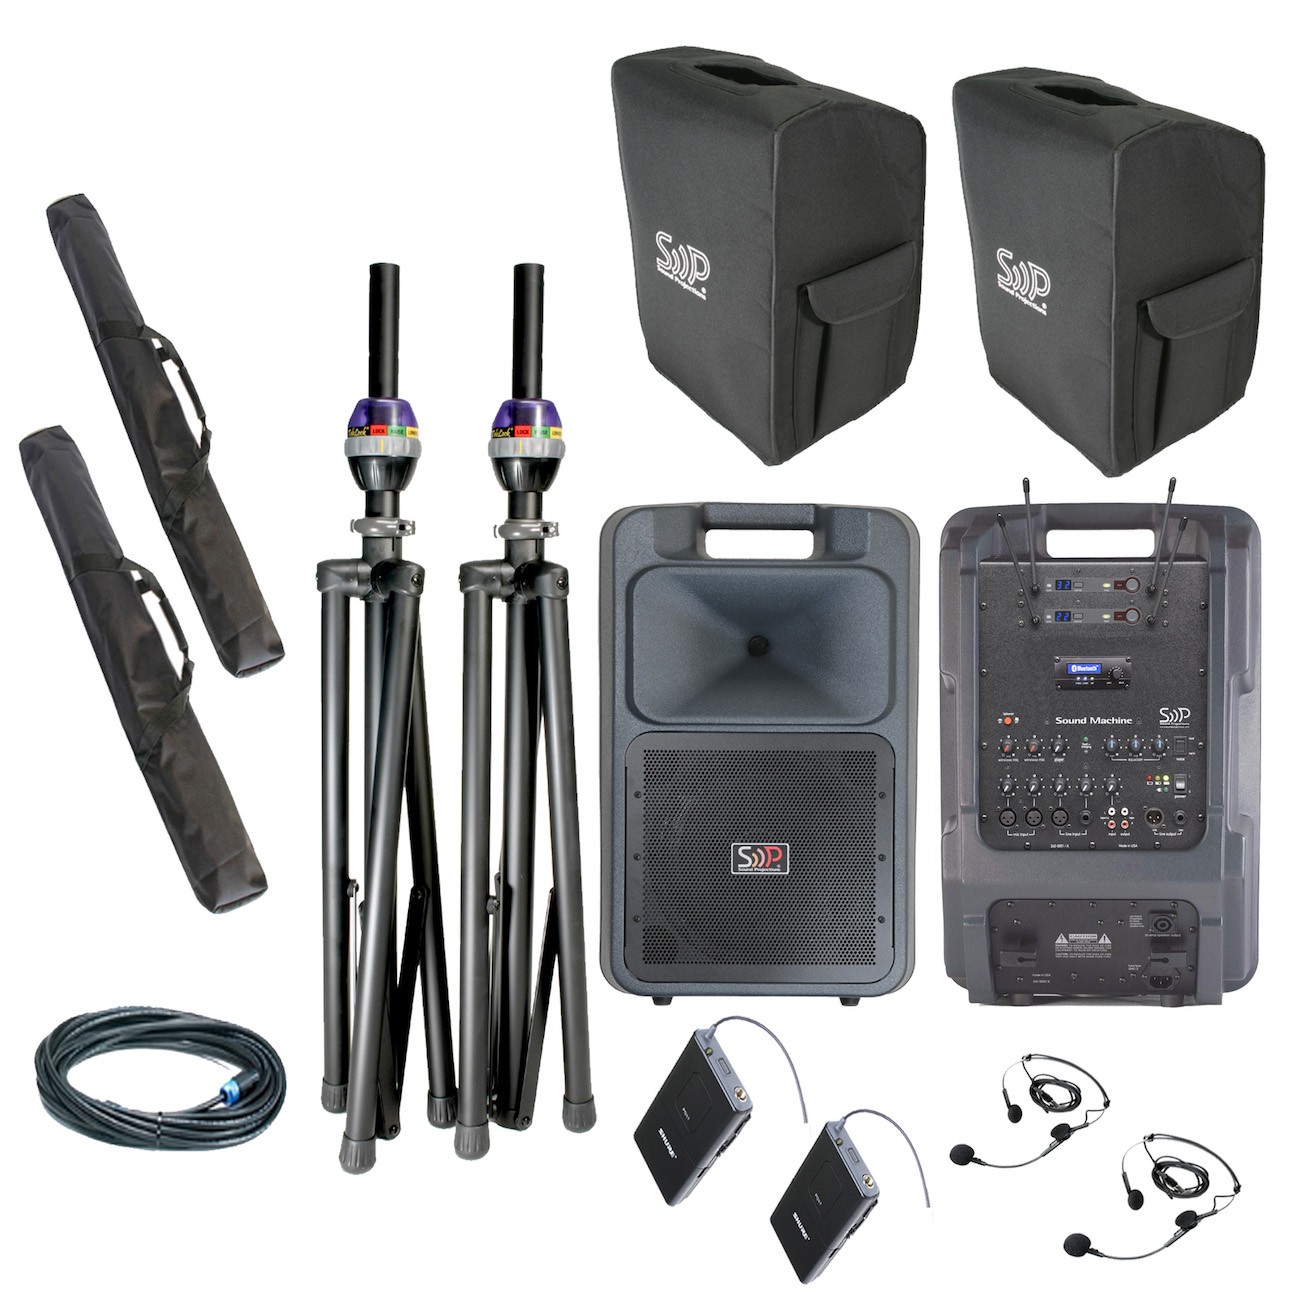 Sound Projections SM-5 Deluxe w/Dual Digital Wireless Systems, OPT-600 Bluetooth & Comp Speaker